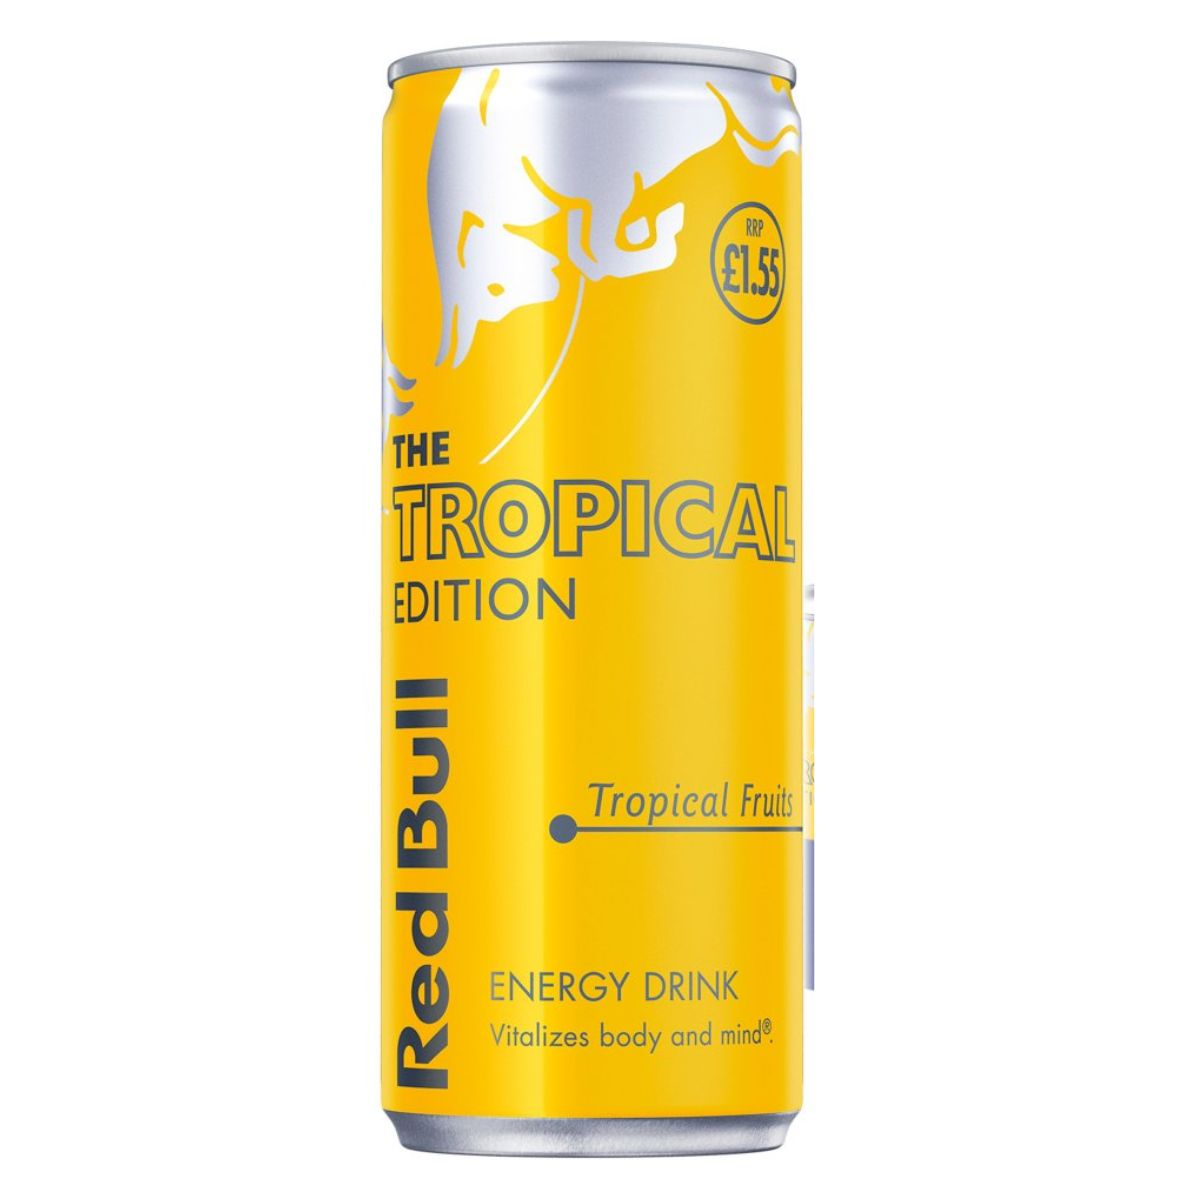 A can of Red Bull - Energy Drink Tropical Edition - 250ml, featuring a bright yellow design with an illustration of a bull and tropical fruits, priced at £1.55.